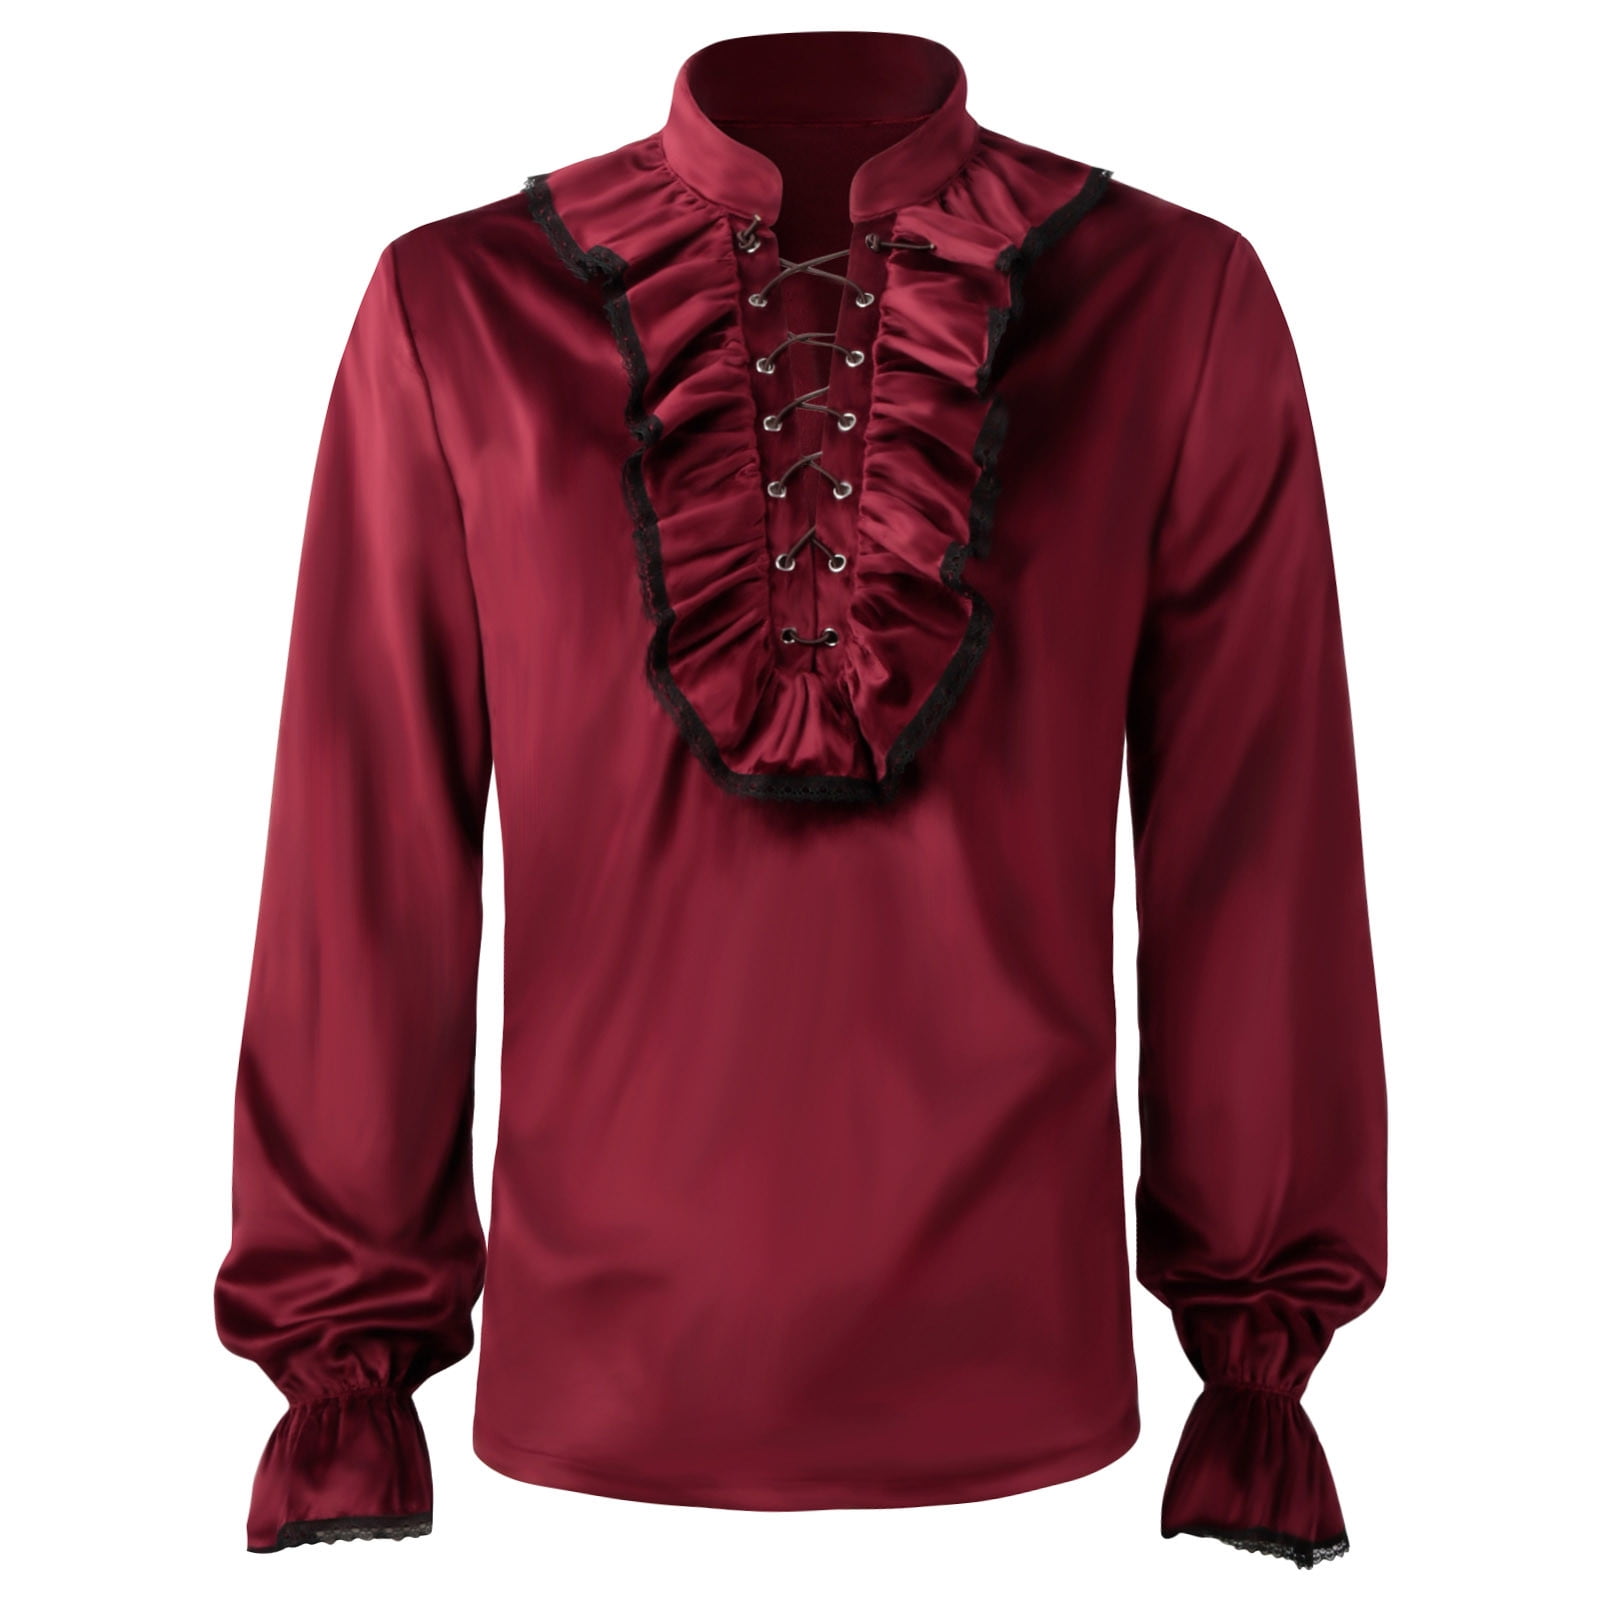 Vintage Medieval Renaissance Shirt Tucker Belt With Stand Collar And  Bandwidth Loose Fit In Solid Colors From Manxinxin, $22.71